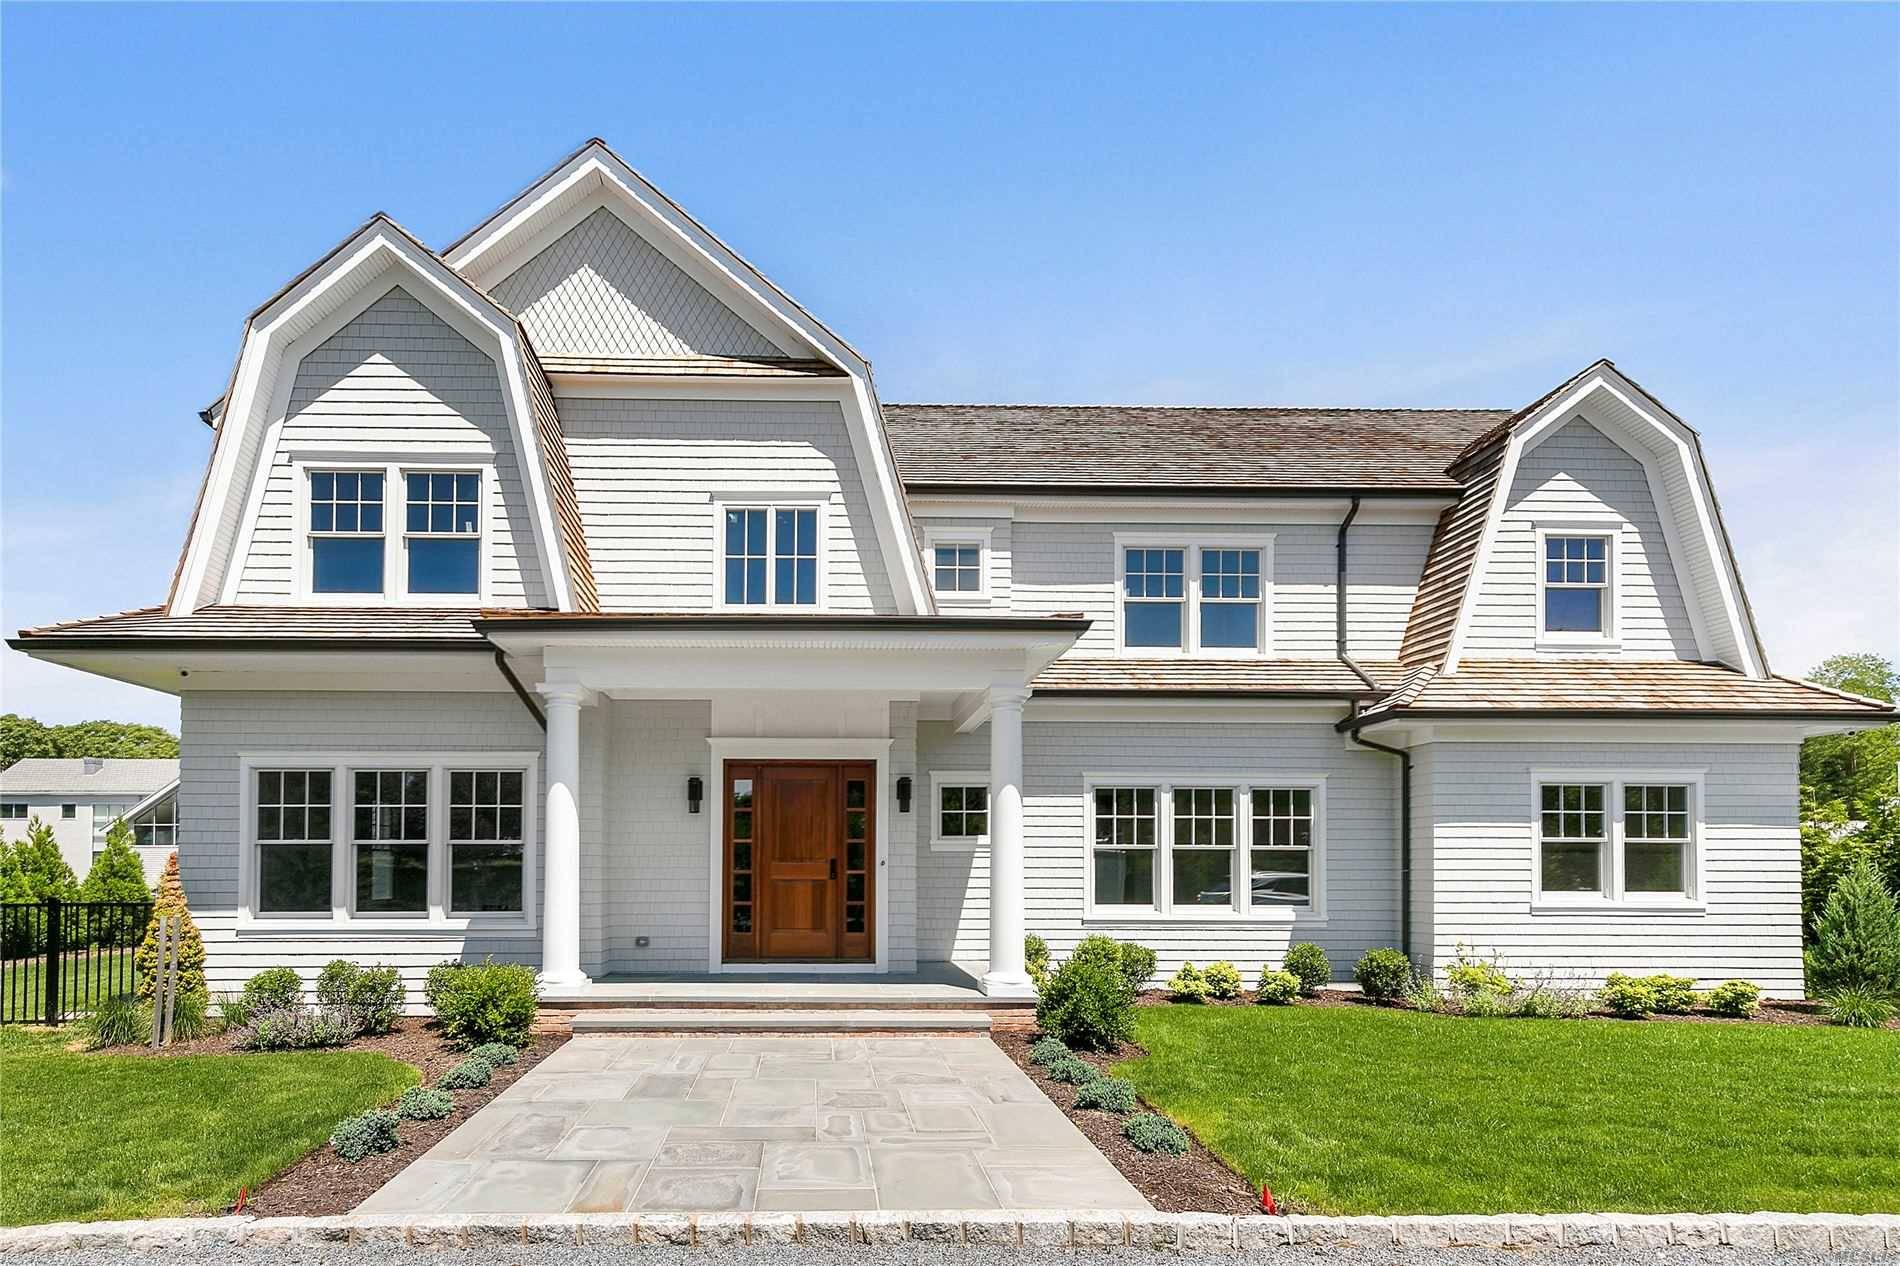 Spectacular new construction south of the highway in the heart of Quogue.